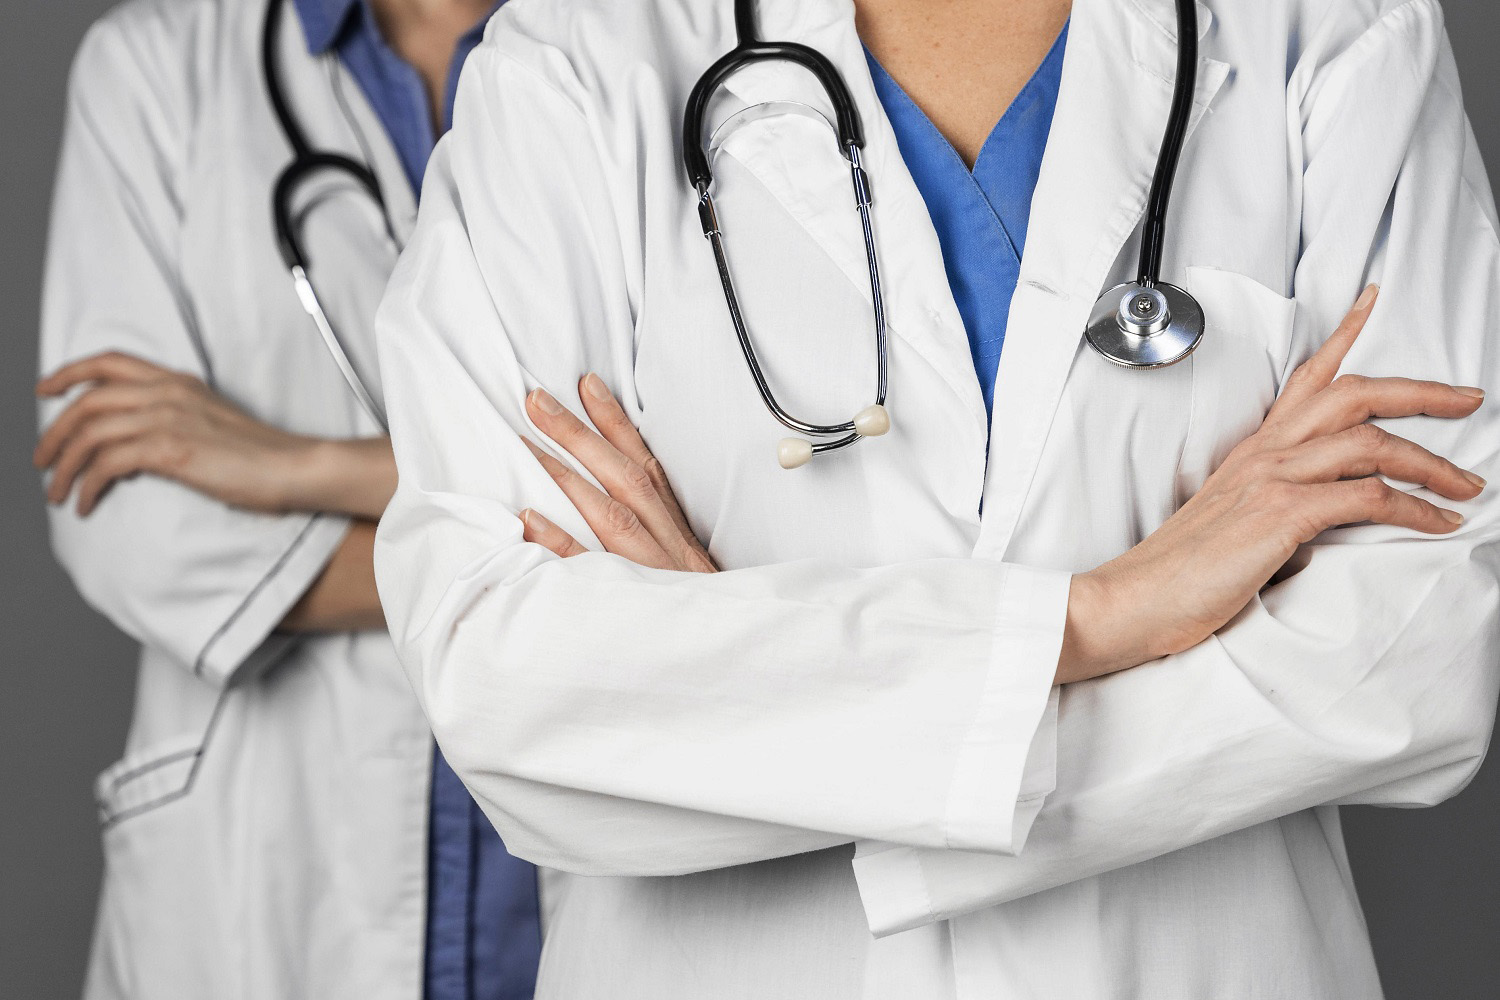 Capacity of mid-level medical practitioners in Ukraine is underutilised